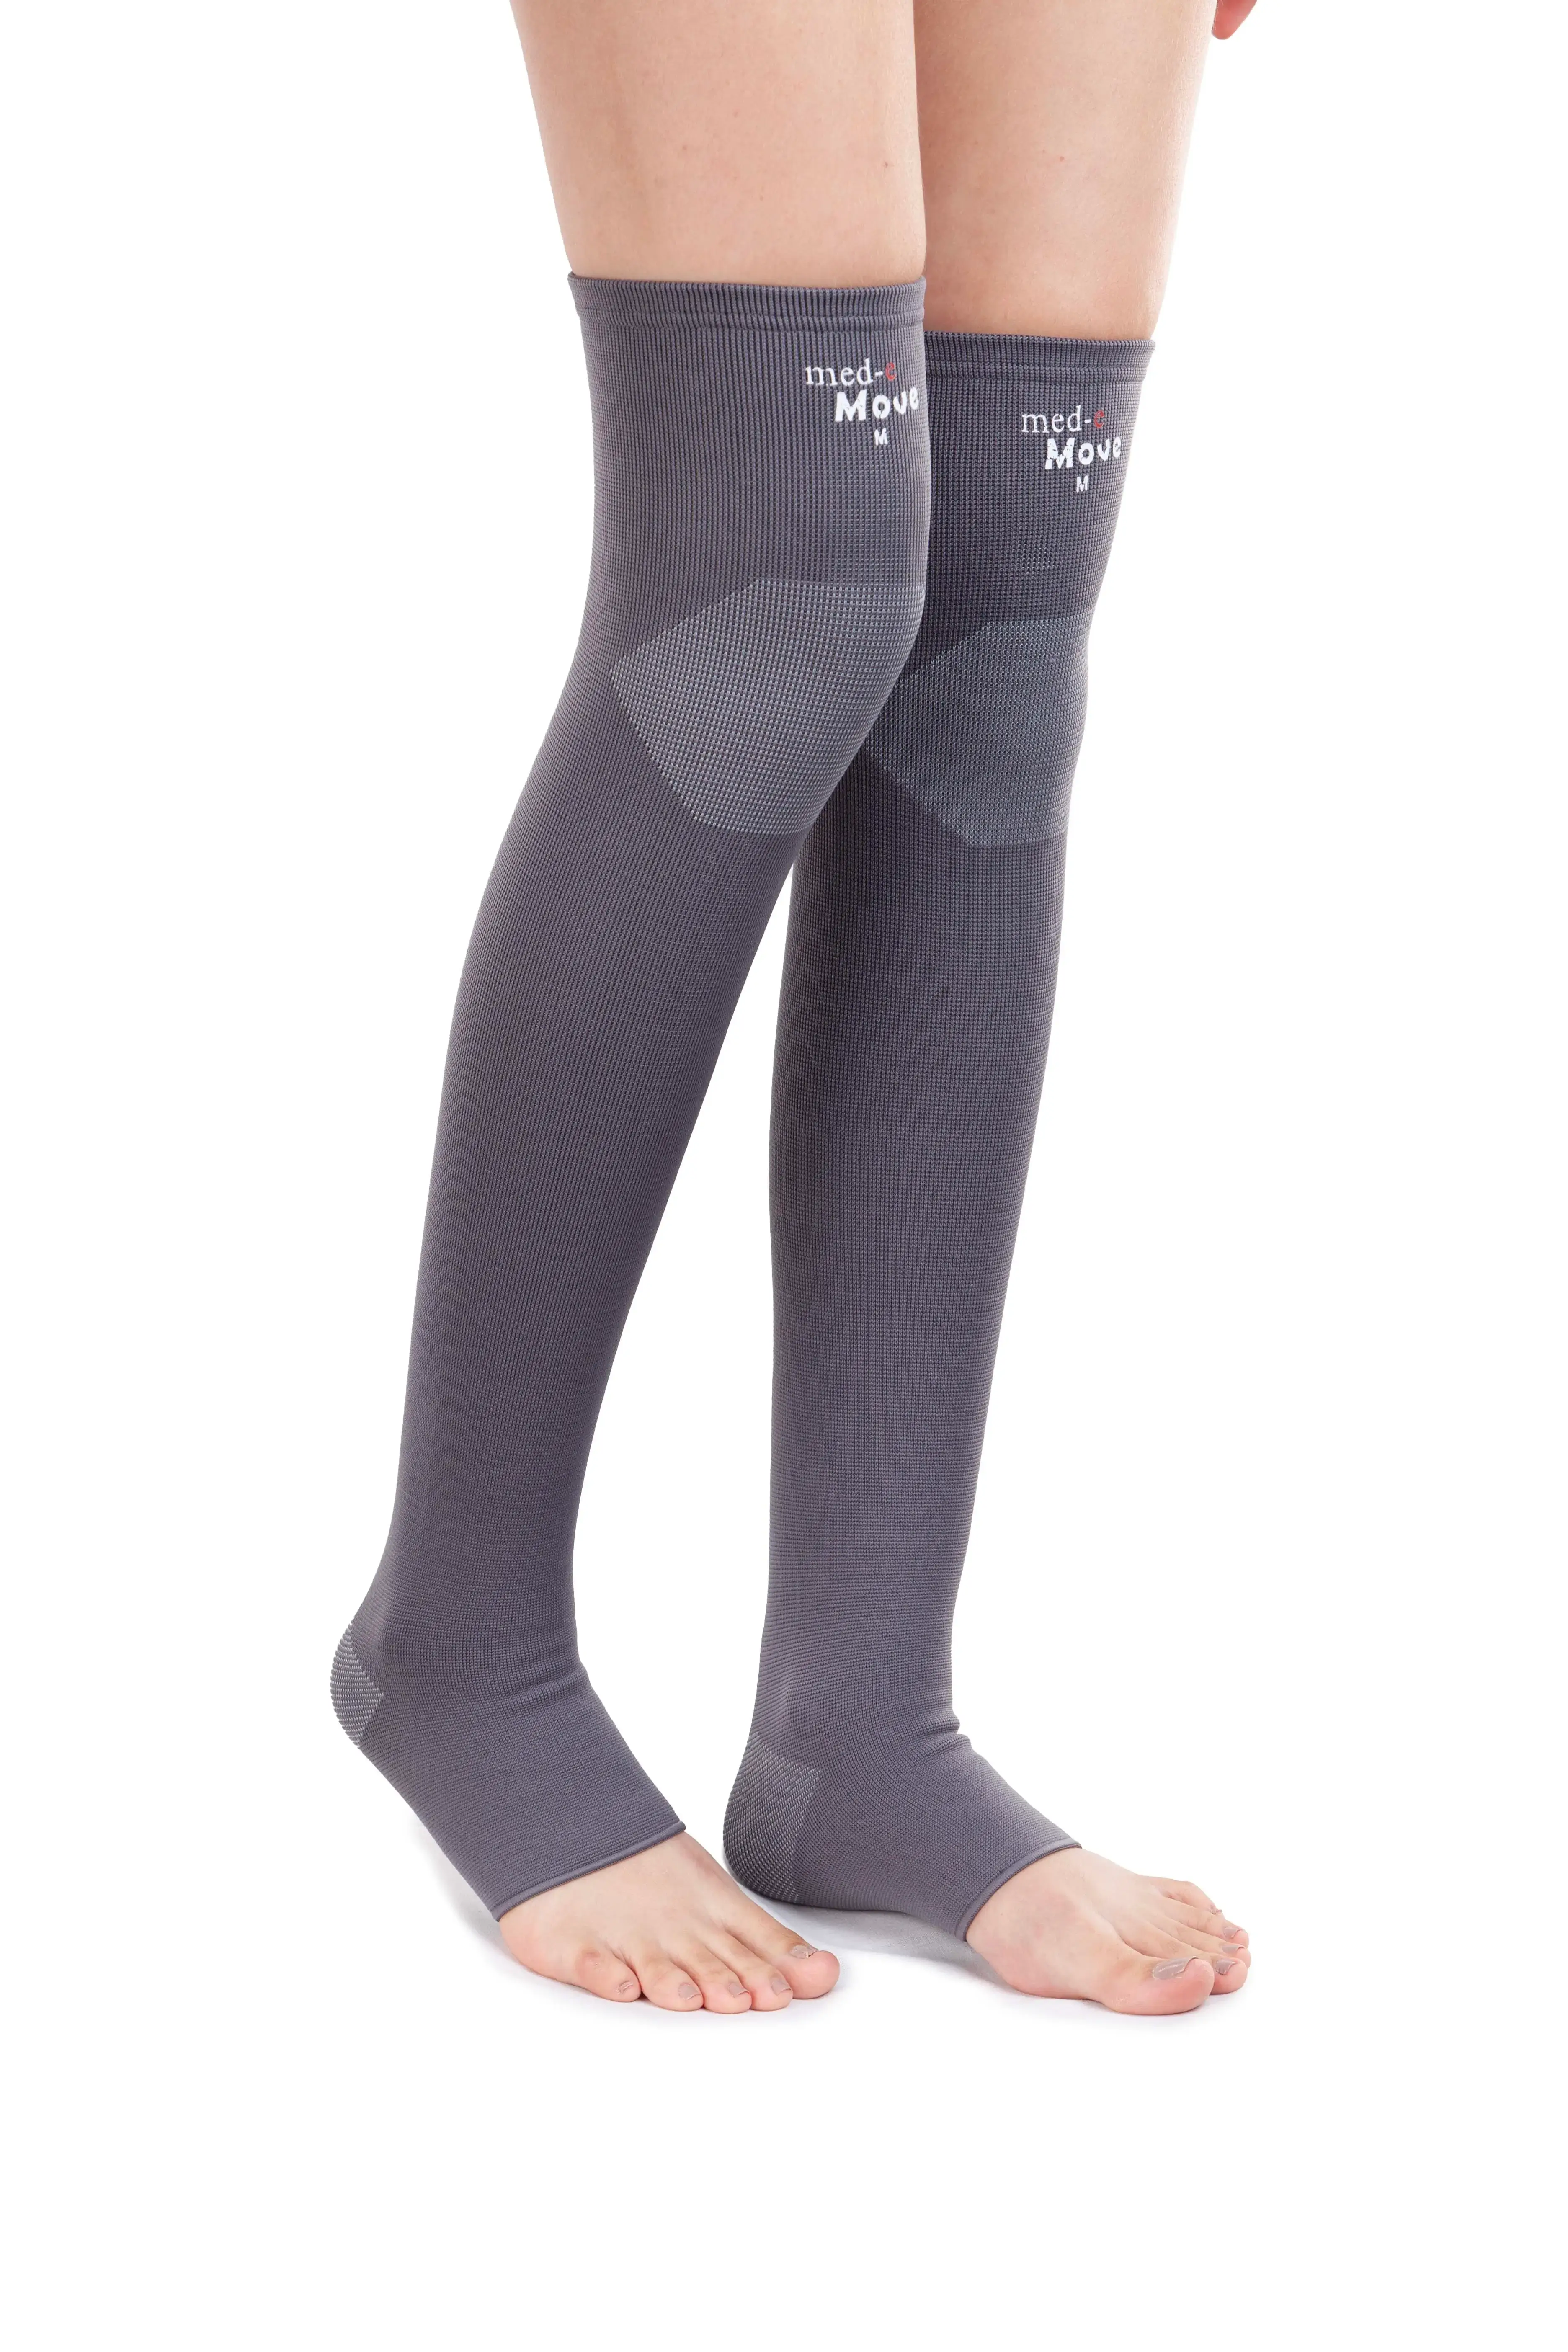 Medemove Compression Stockings Mid Thigh